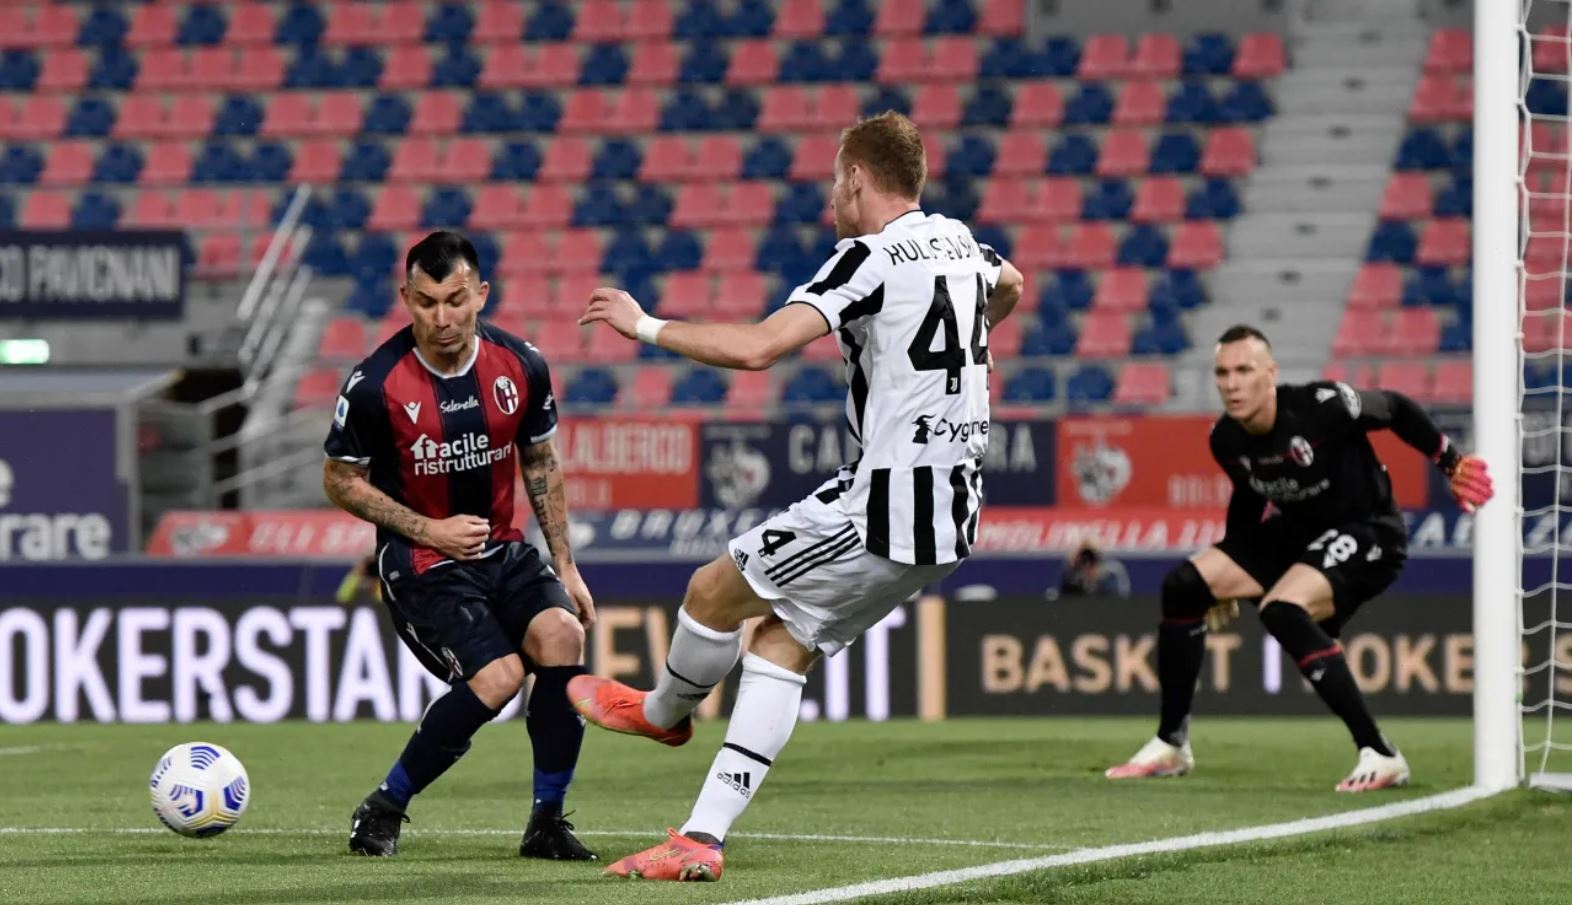 In the last Serie A Round, it was an easy victory for the Juventus who coasted past their Bologna rivals with a 1-4 scoreline to boast of